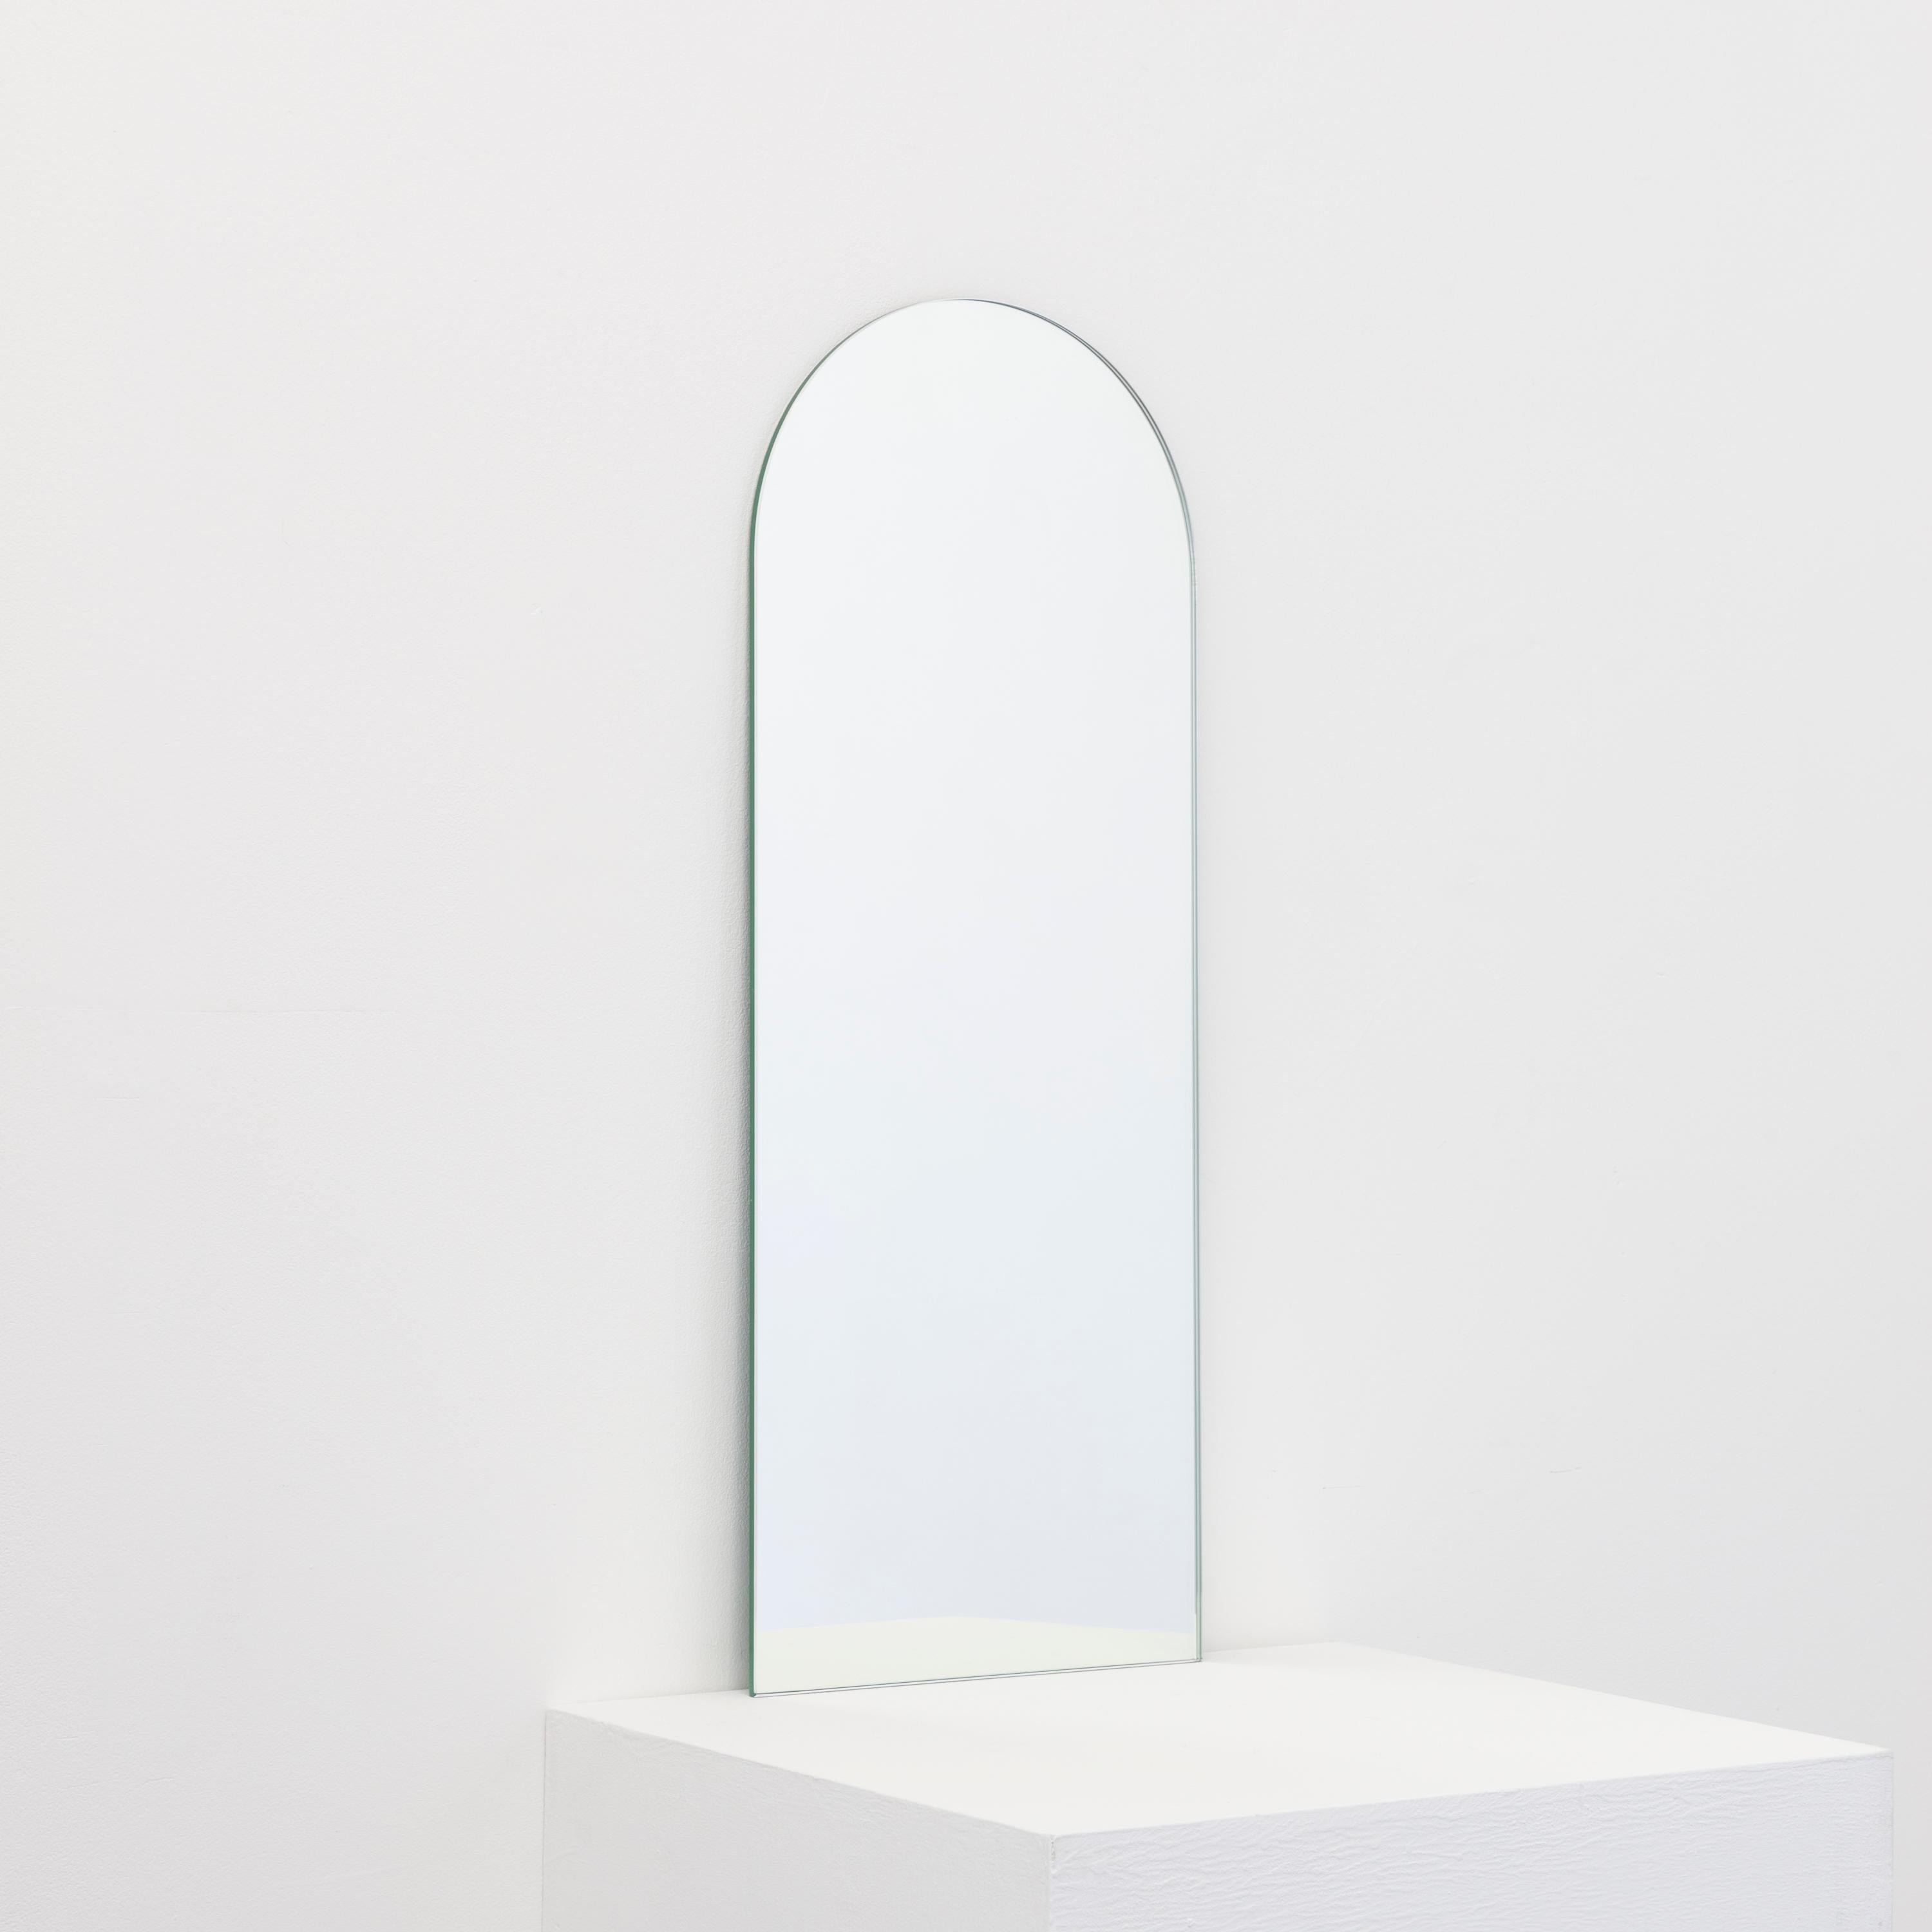 Minimalist arched shape frameless mirror with a floating effect. Quality design that ensures the mirror sits perfectly parallel to the wall. Designed and made in London, UK.

Fitted with professional plates not visible once installed for an easy and